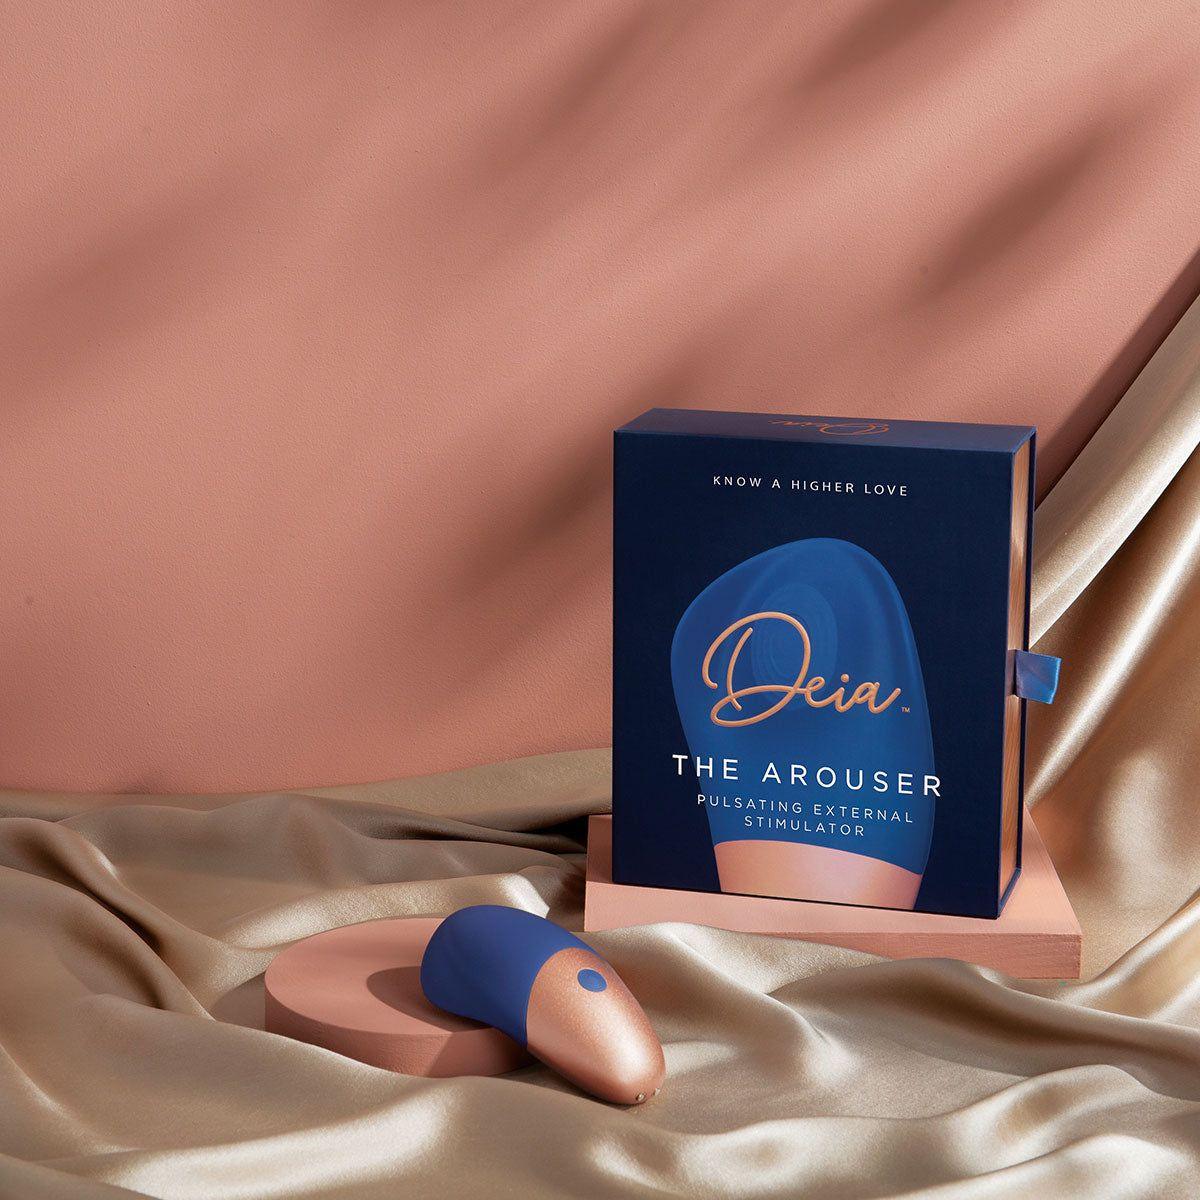 The Arouser by Deia - shop enby